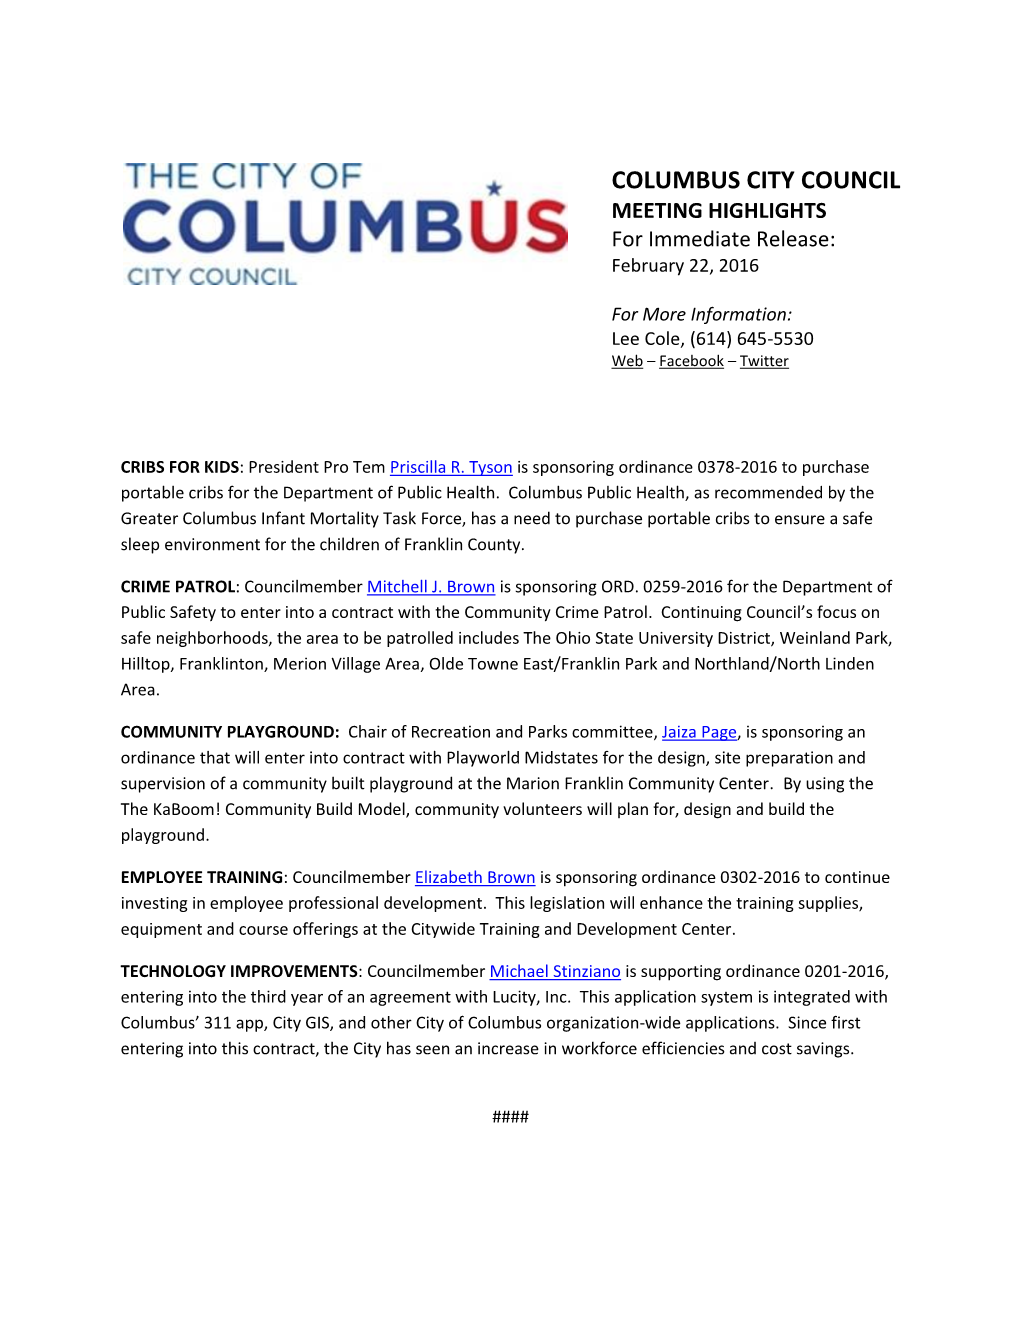 COLUMBUS CITY COUNCIL MEETING HIGHLIGHTS for Immediate Release: February 22, 2016